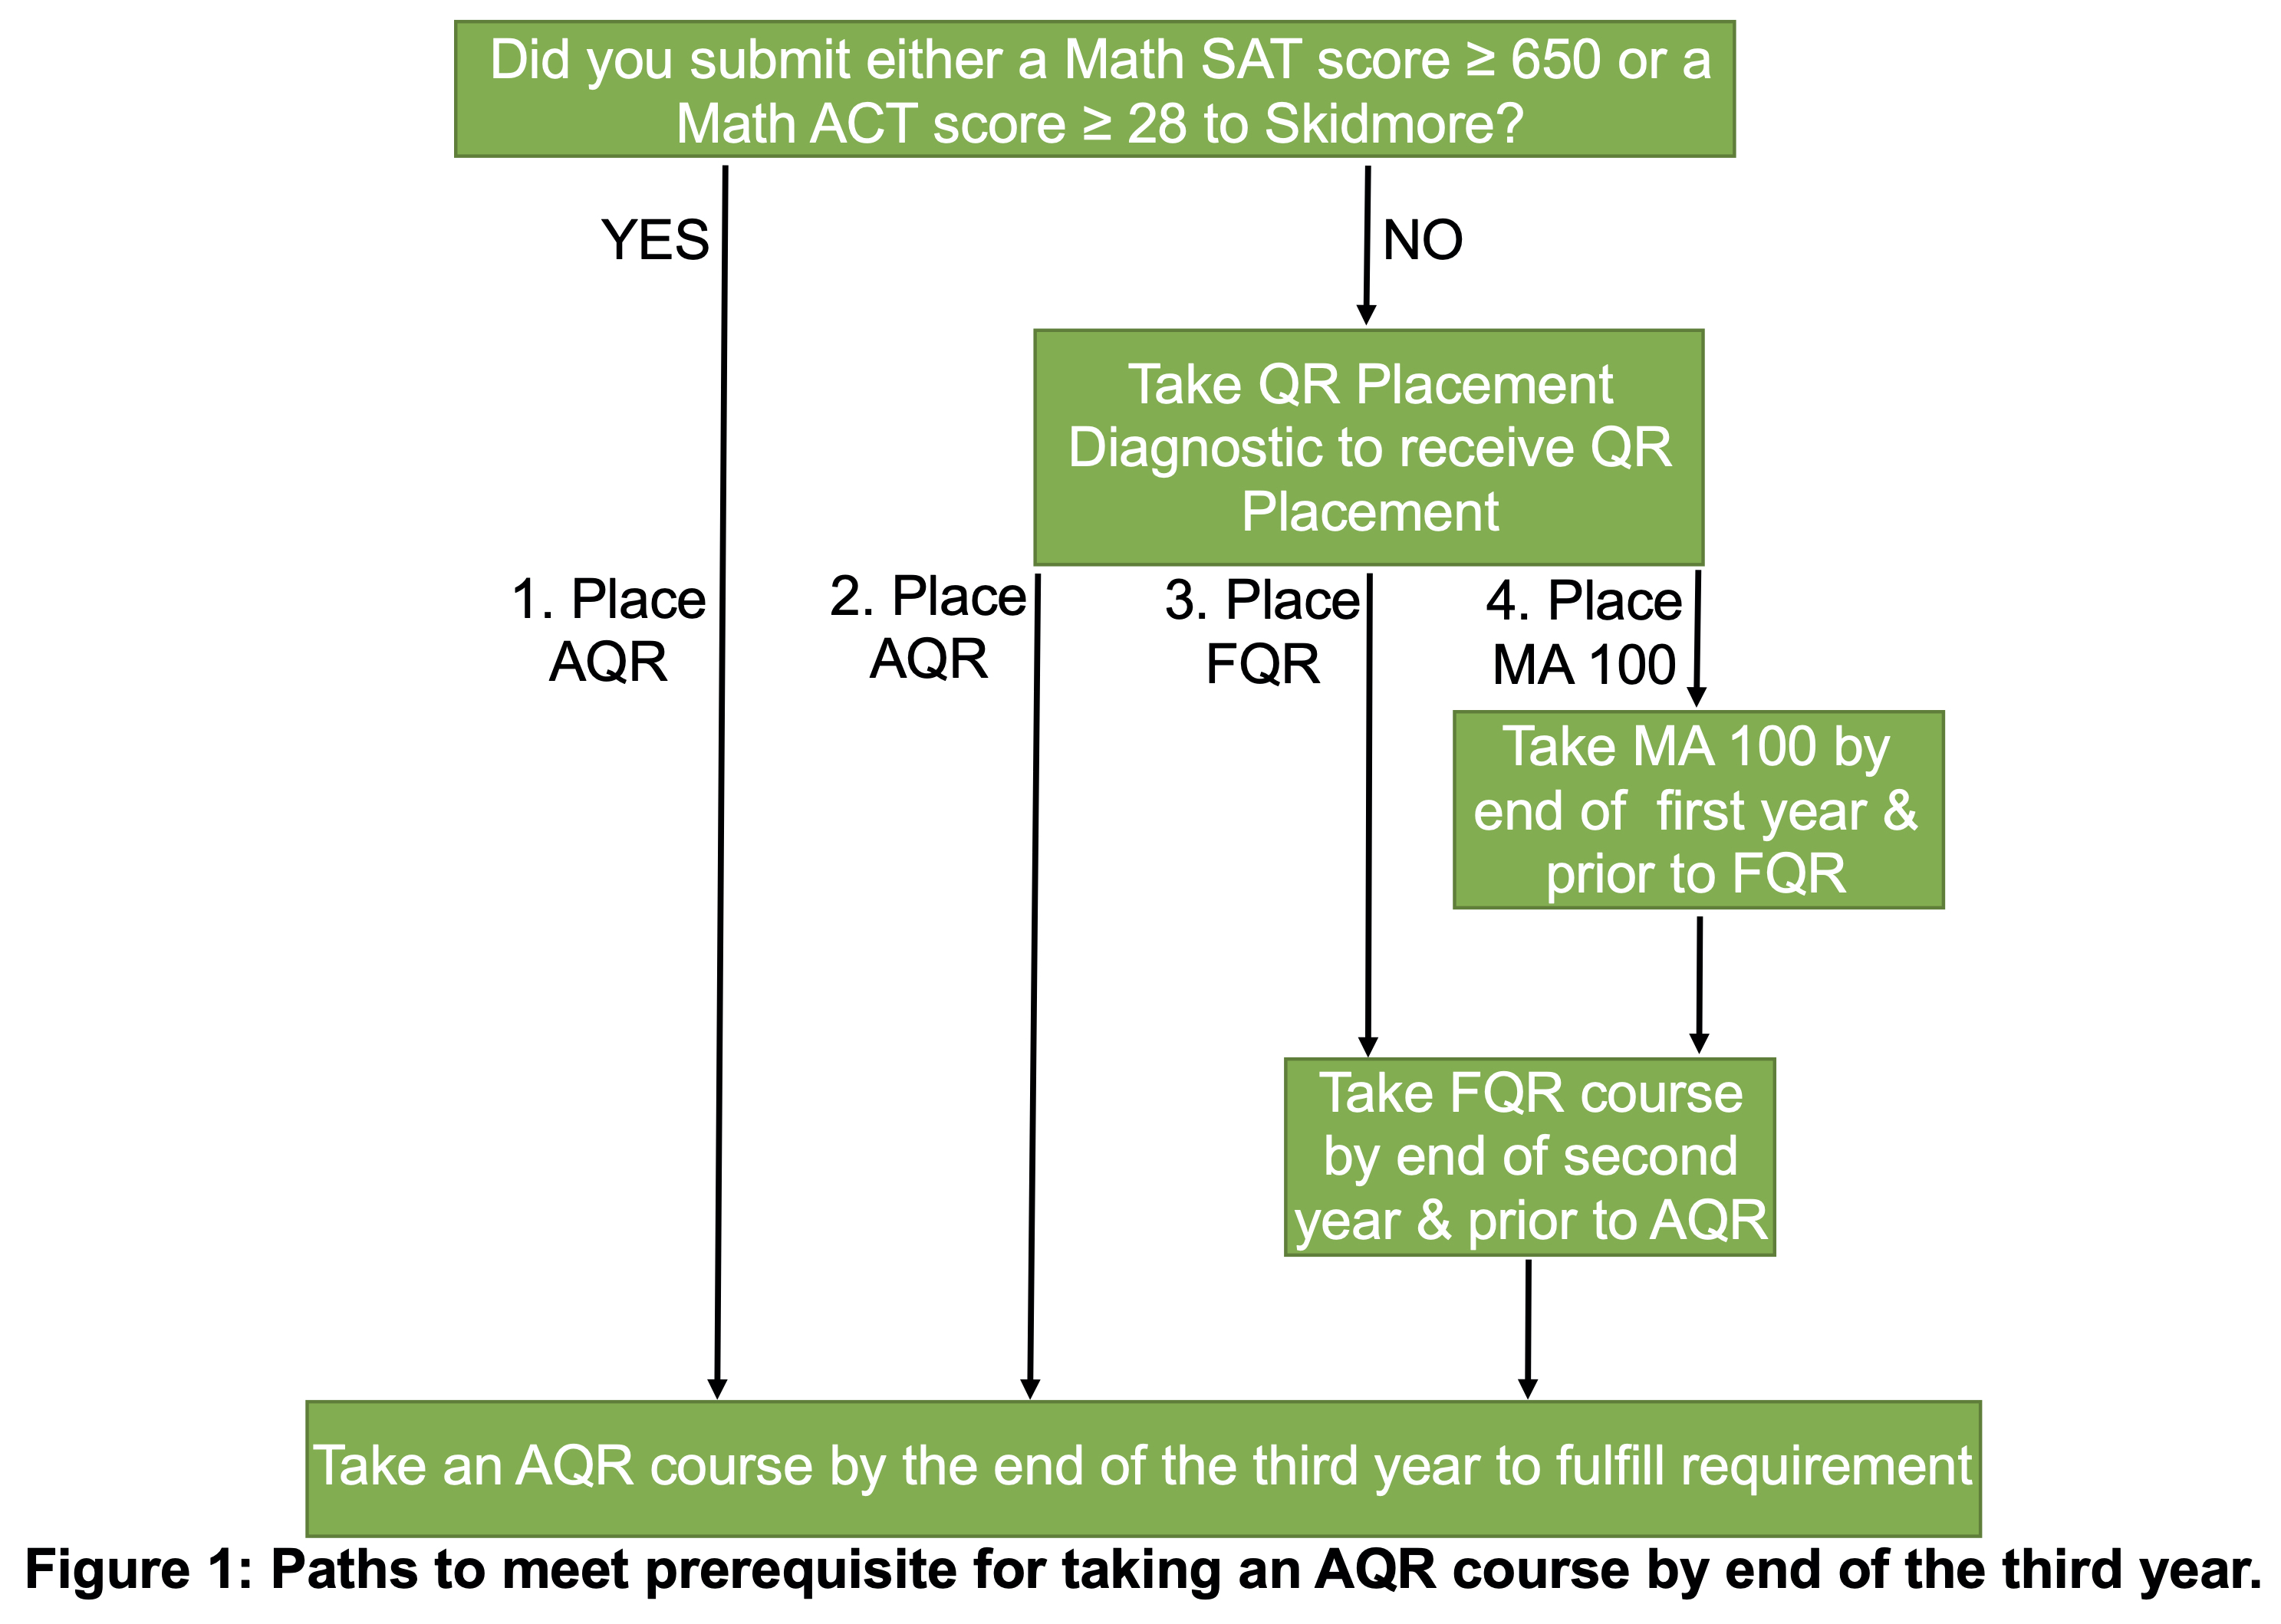 Students can meet the prerequisite to enroll in an AQR course in one of four ways:  Achieving a score of at least 650 on the MSAT I examination, a score of at least 570 on any Mathematics SAT II subject examination, or a score of at least 28 on the Mathematics ACT examination to directly place into an AQR course. ACT or SAT scores must be submitted to the College. Taking the online QR Placement Diagnostic and earning a score on the diagnostic that places them directly into an AQR course.  Incoming students who do not submit ACT or SAT scores or whose scores do not place them into an AQR course must take the online QR Placement Diagnostic. Taking the online QR Placement Diagnostic and earning a score on the diagnostic that places them directly into an FQR course. Students who place into an FQR course must successfully complete it by the end of their second year.  These courses, which are offered by a variety of departments, emphasize the application of mathematical calculations and concepts to daily life. Taking the online QR Placement Diagnostic and earning a score on the diagnostic that places into MA 100 (Quantitative Reasoning). This course, which emphasizes basic quantitative reasoning skills in mathematics and statistics, is required for all students who do not place into an AQR or FQR course and must be successfully completed by the end of their first year. Students must then successfully complete an FQR course by the end of their second year.